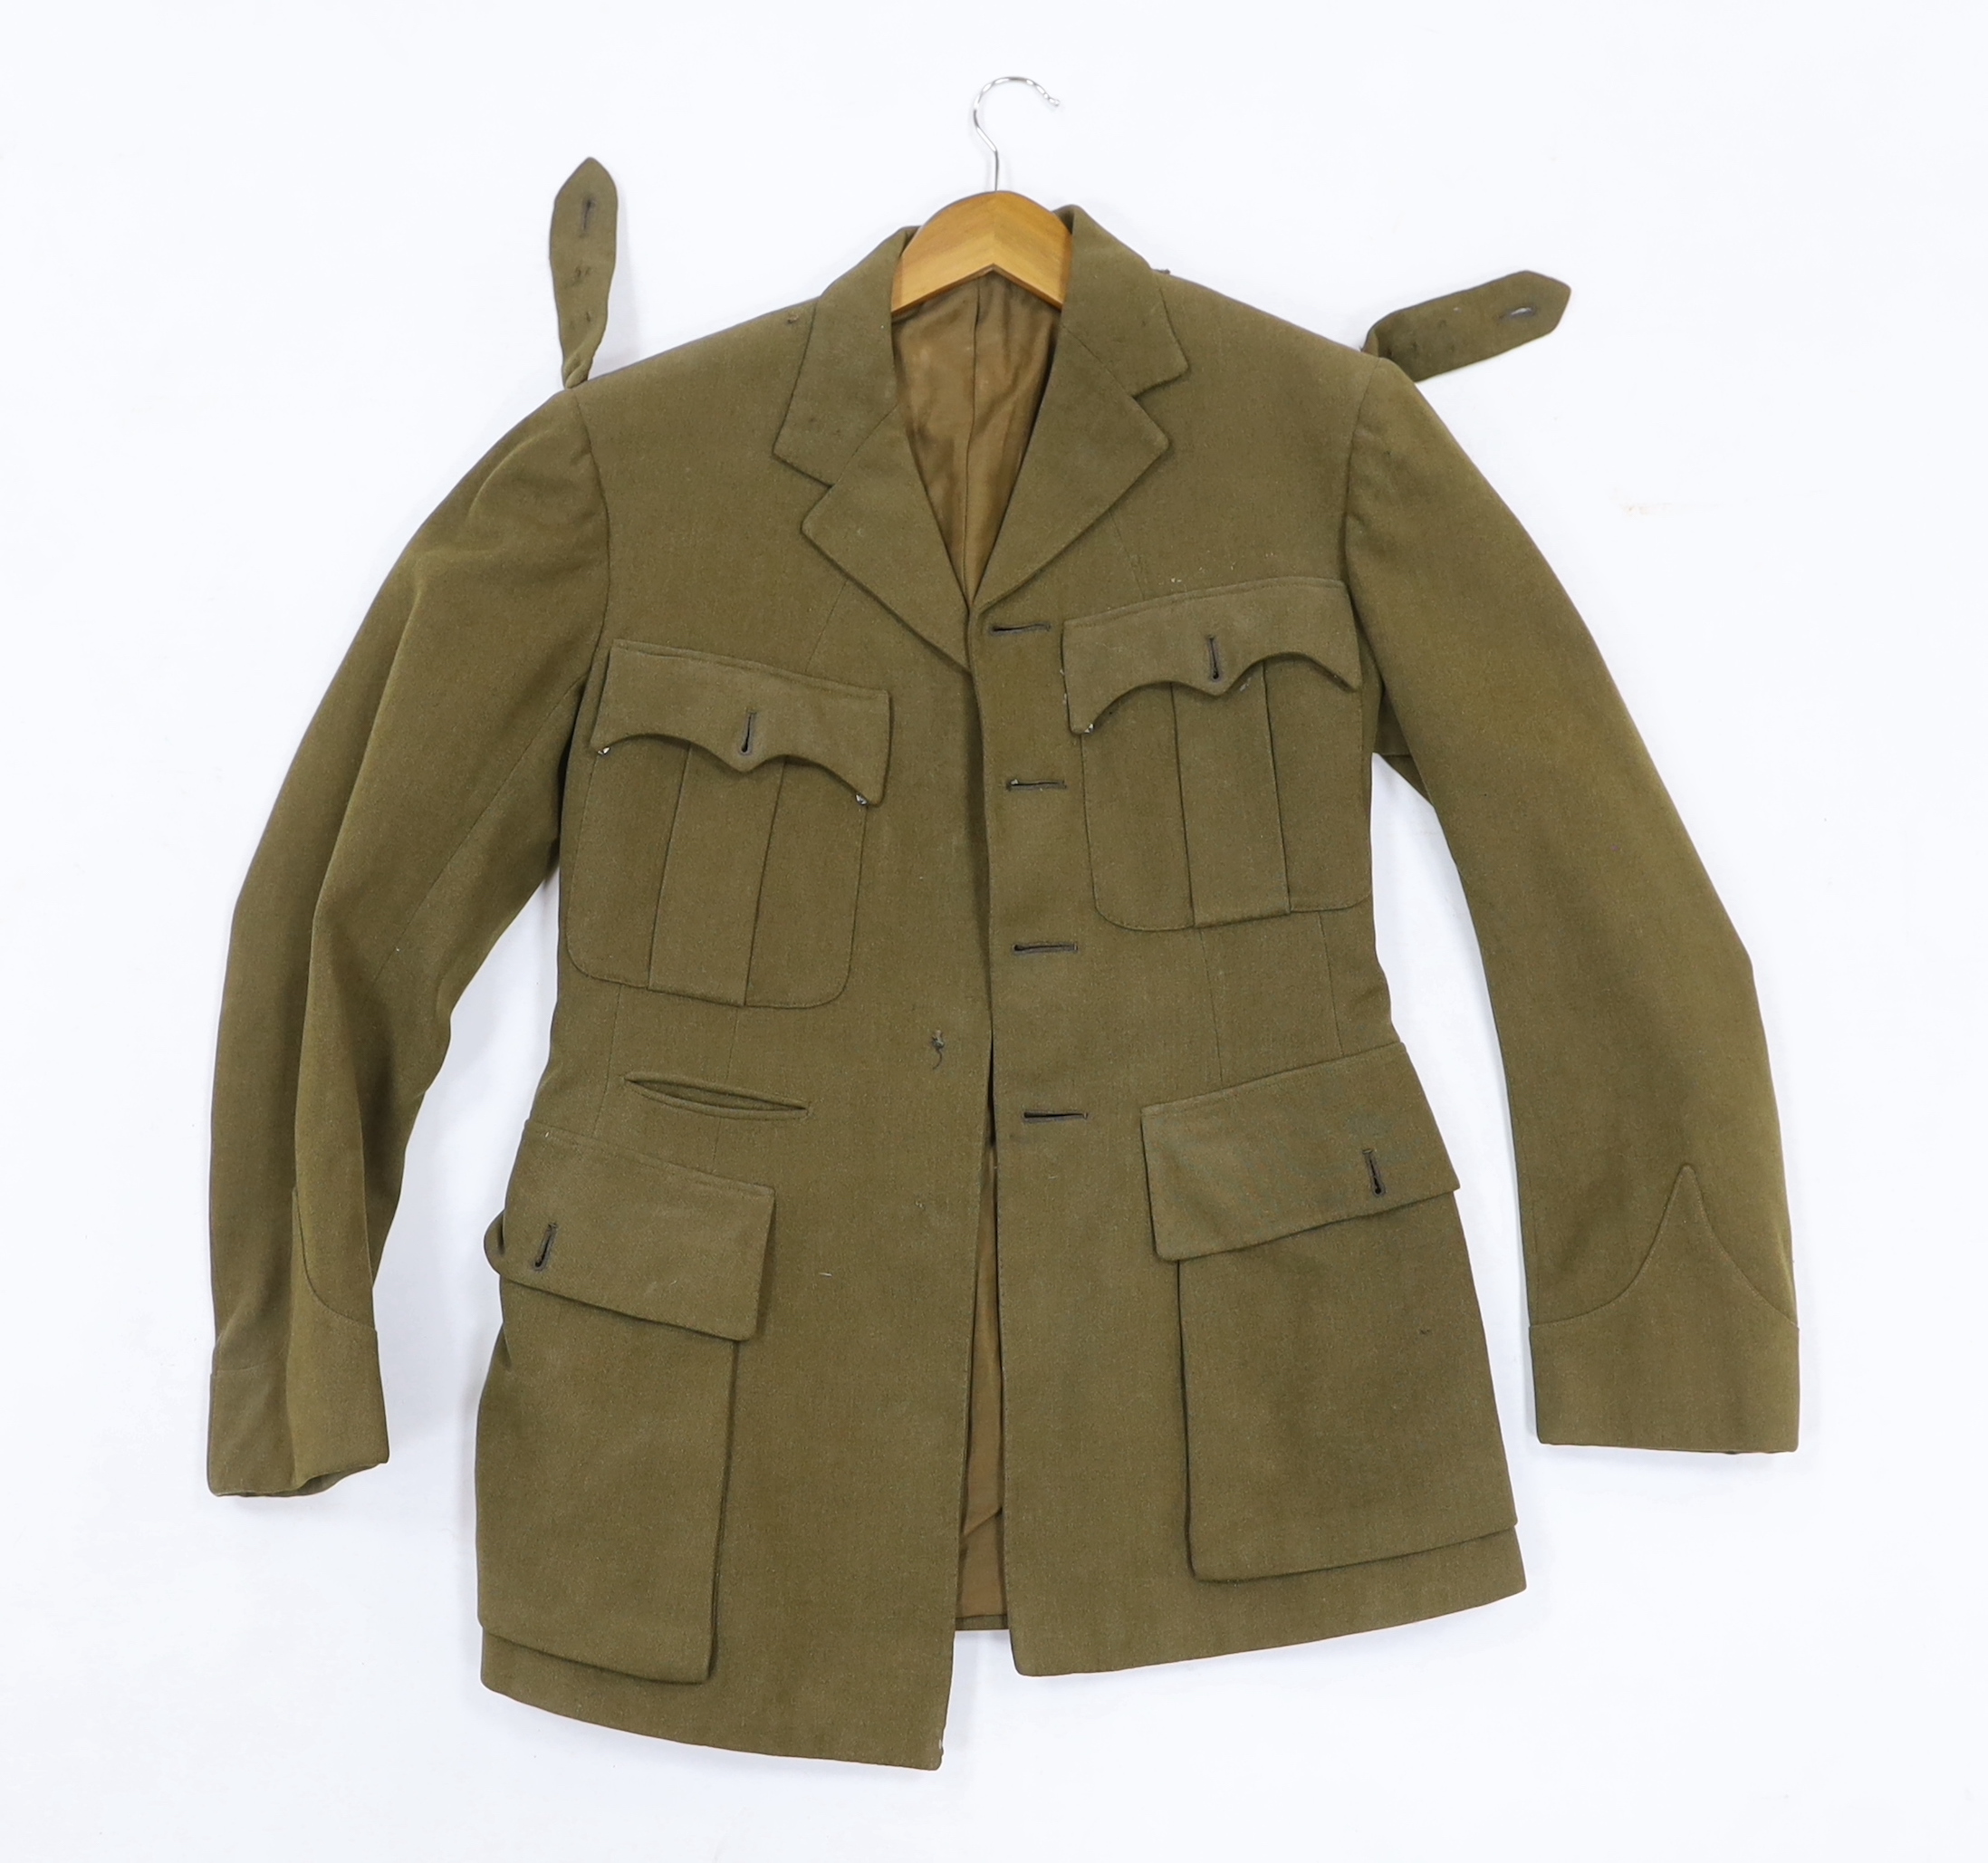 Eight British military uniform blouses/jackets, including two with Royal Sussex Regiment Cinque Ports shoulder insignia, a Queen’s A.C.F. example, etc.